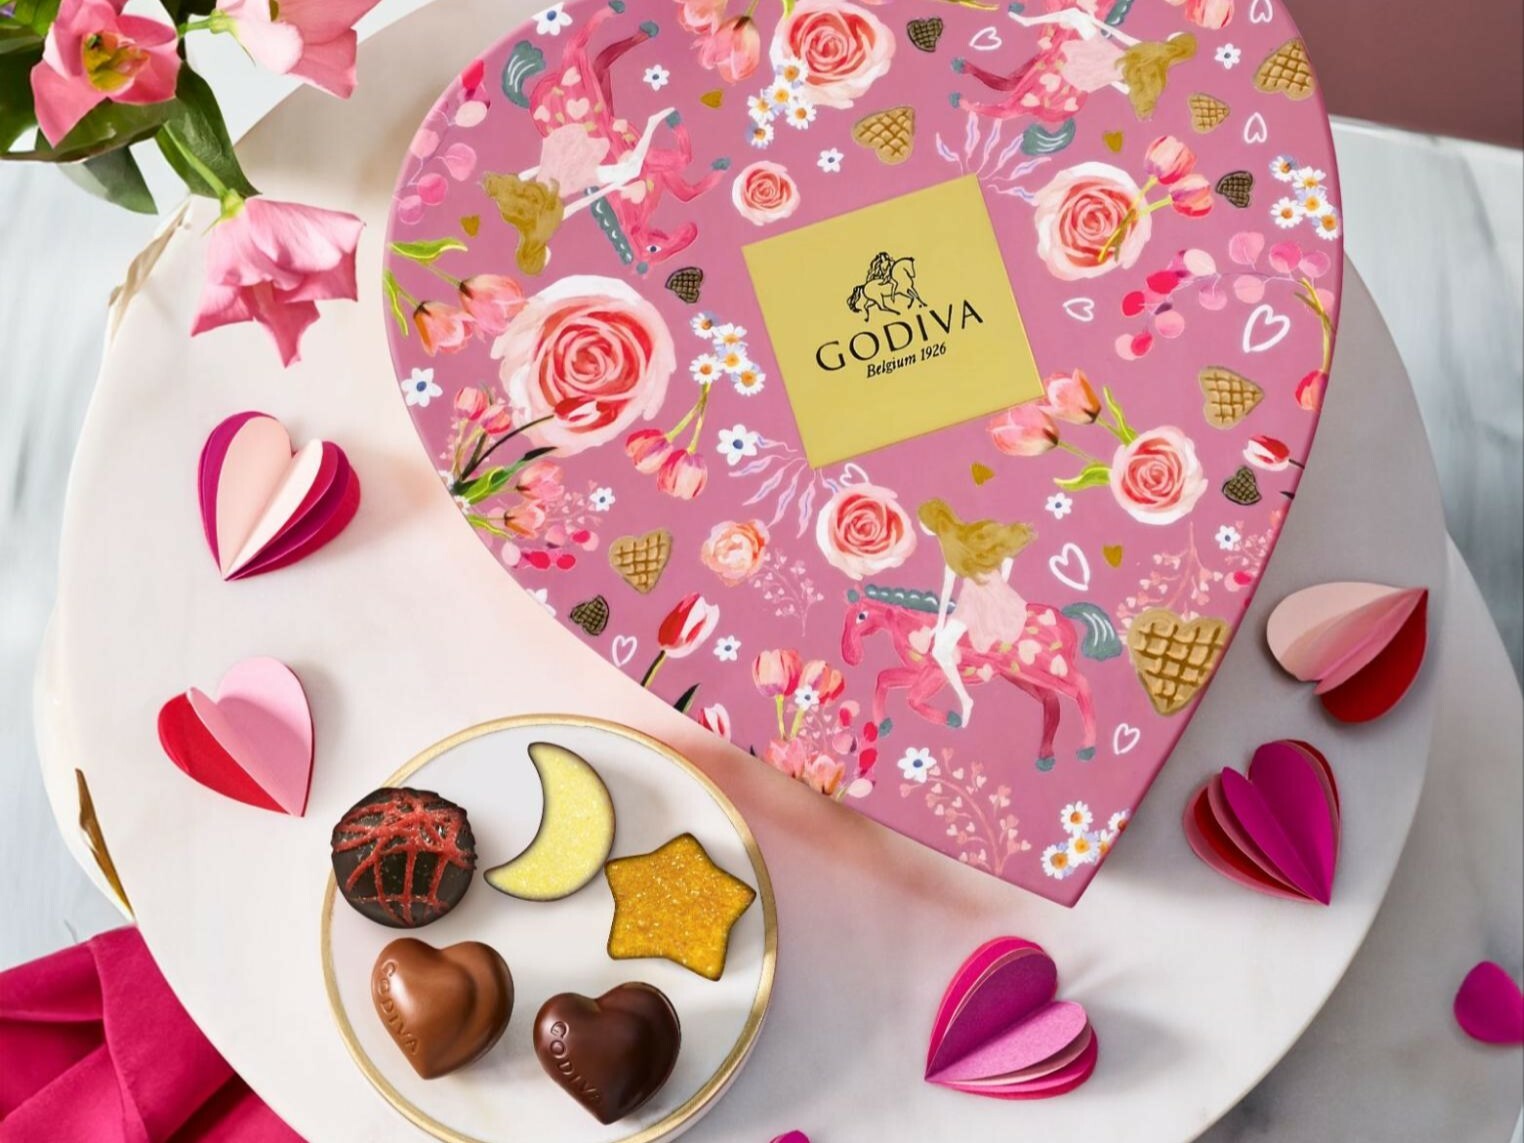 Valentine's Day gift ideas that aren't chocolate or flowers